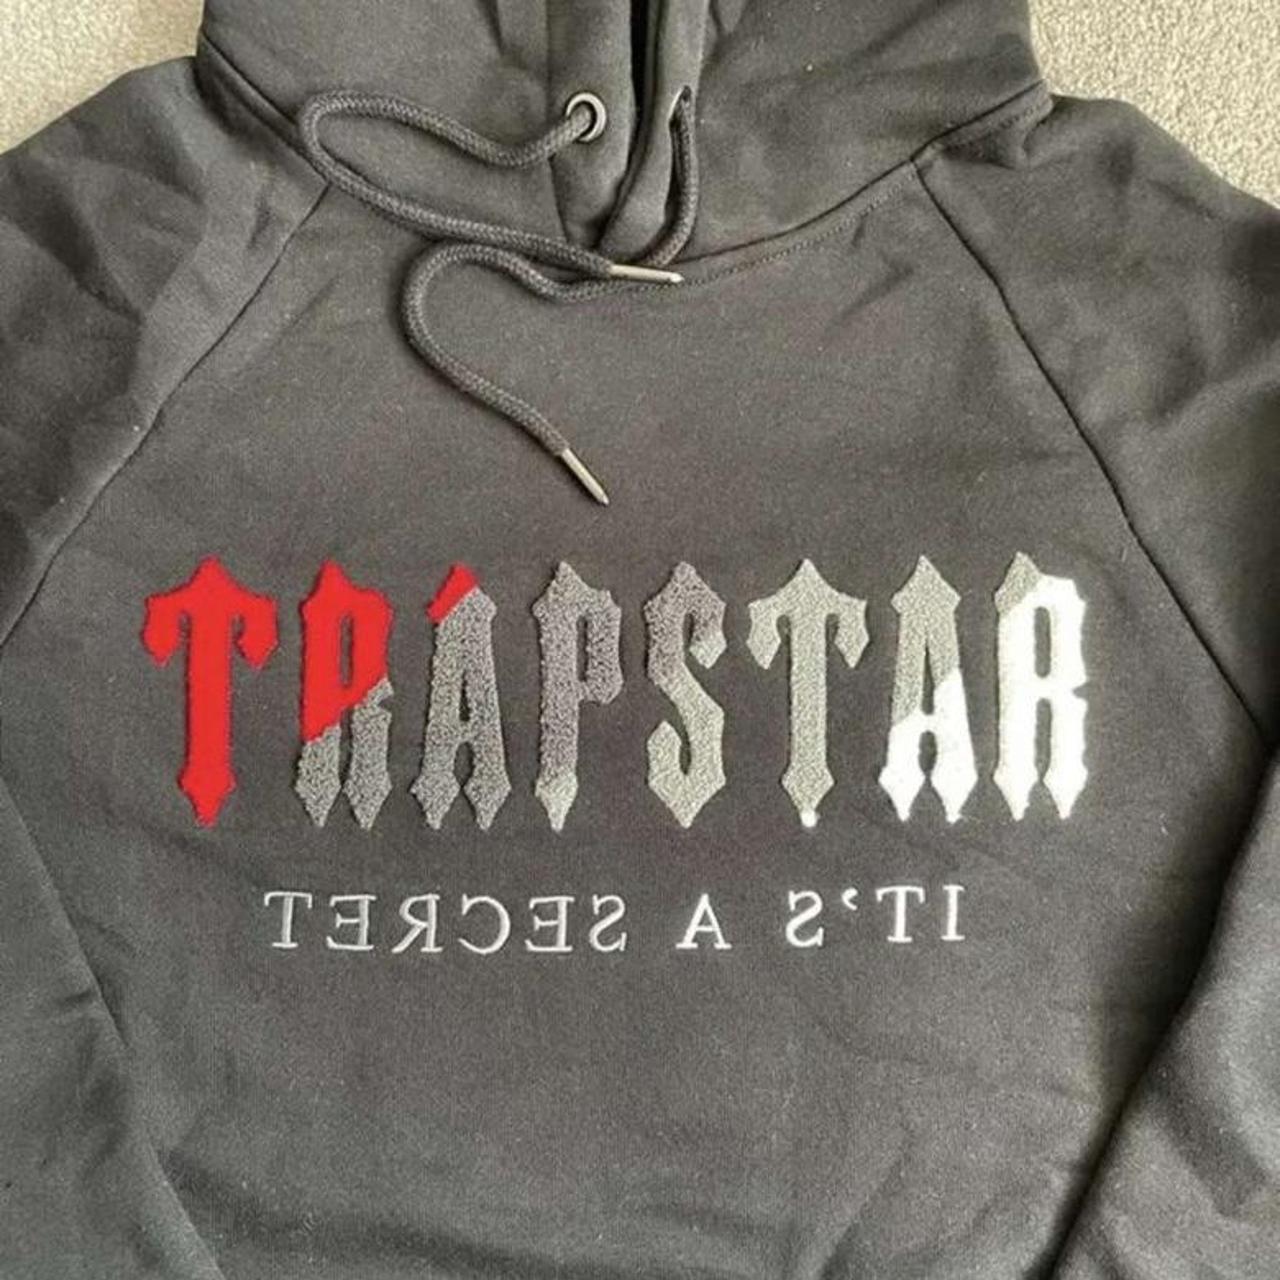 Red white and grey trapstar set - Depop